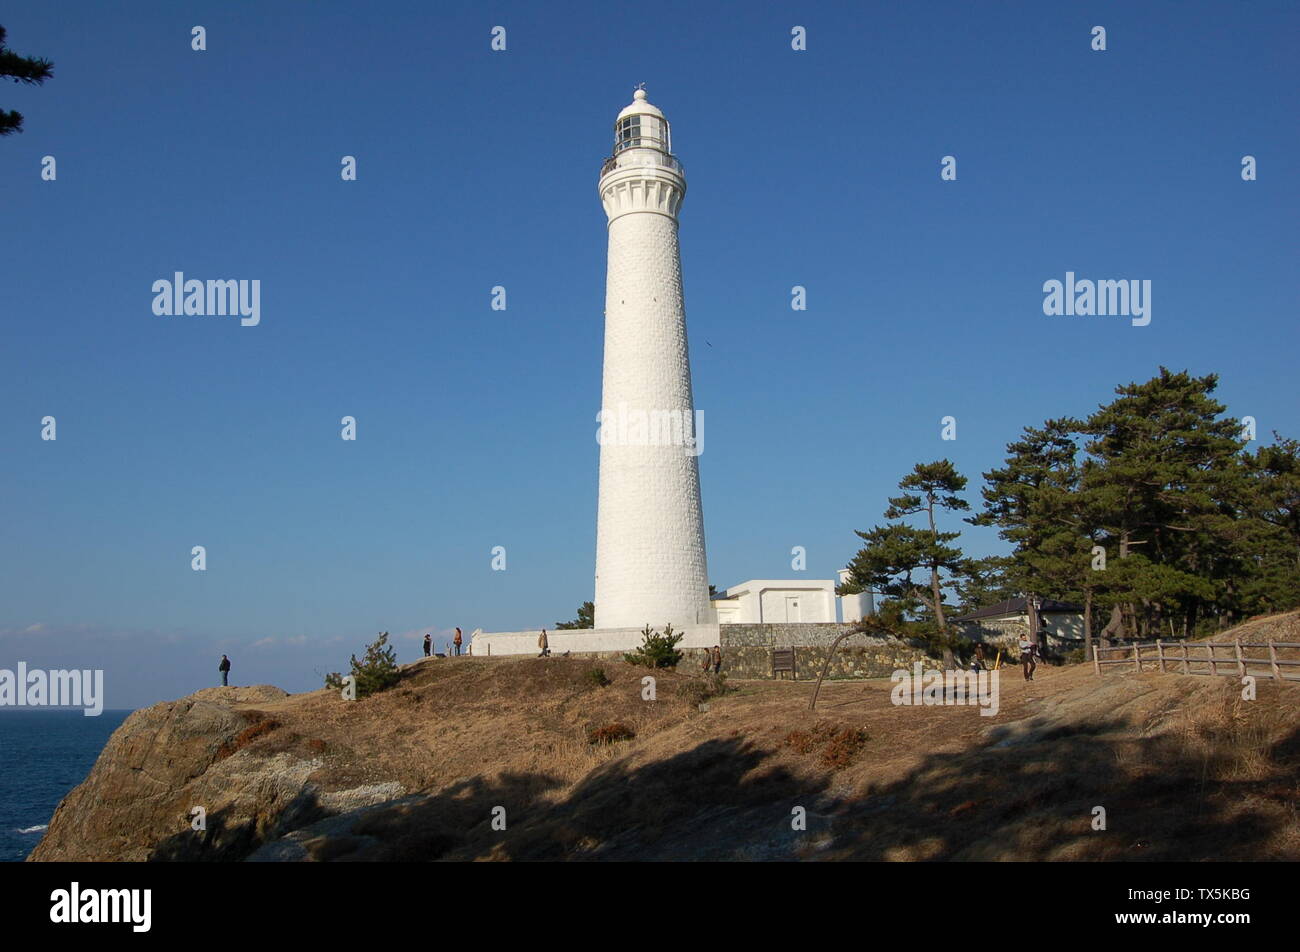 Ae A Cº High Resolution Stock Photography And Images Alamy